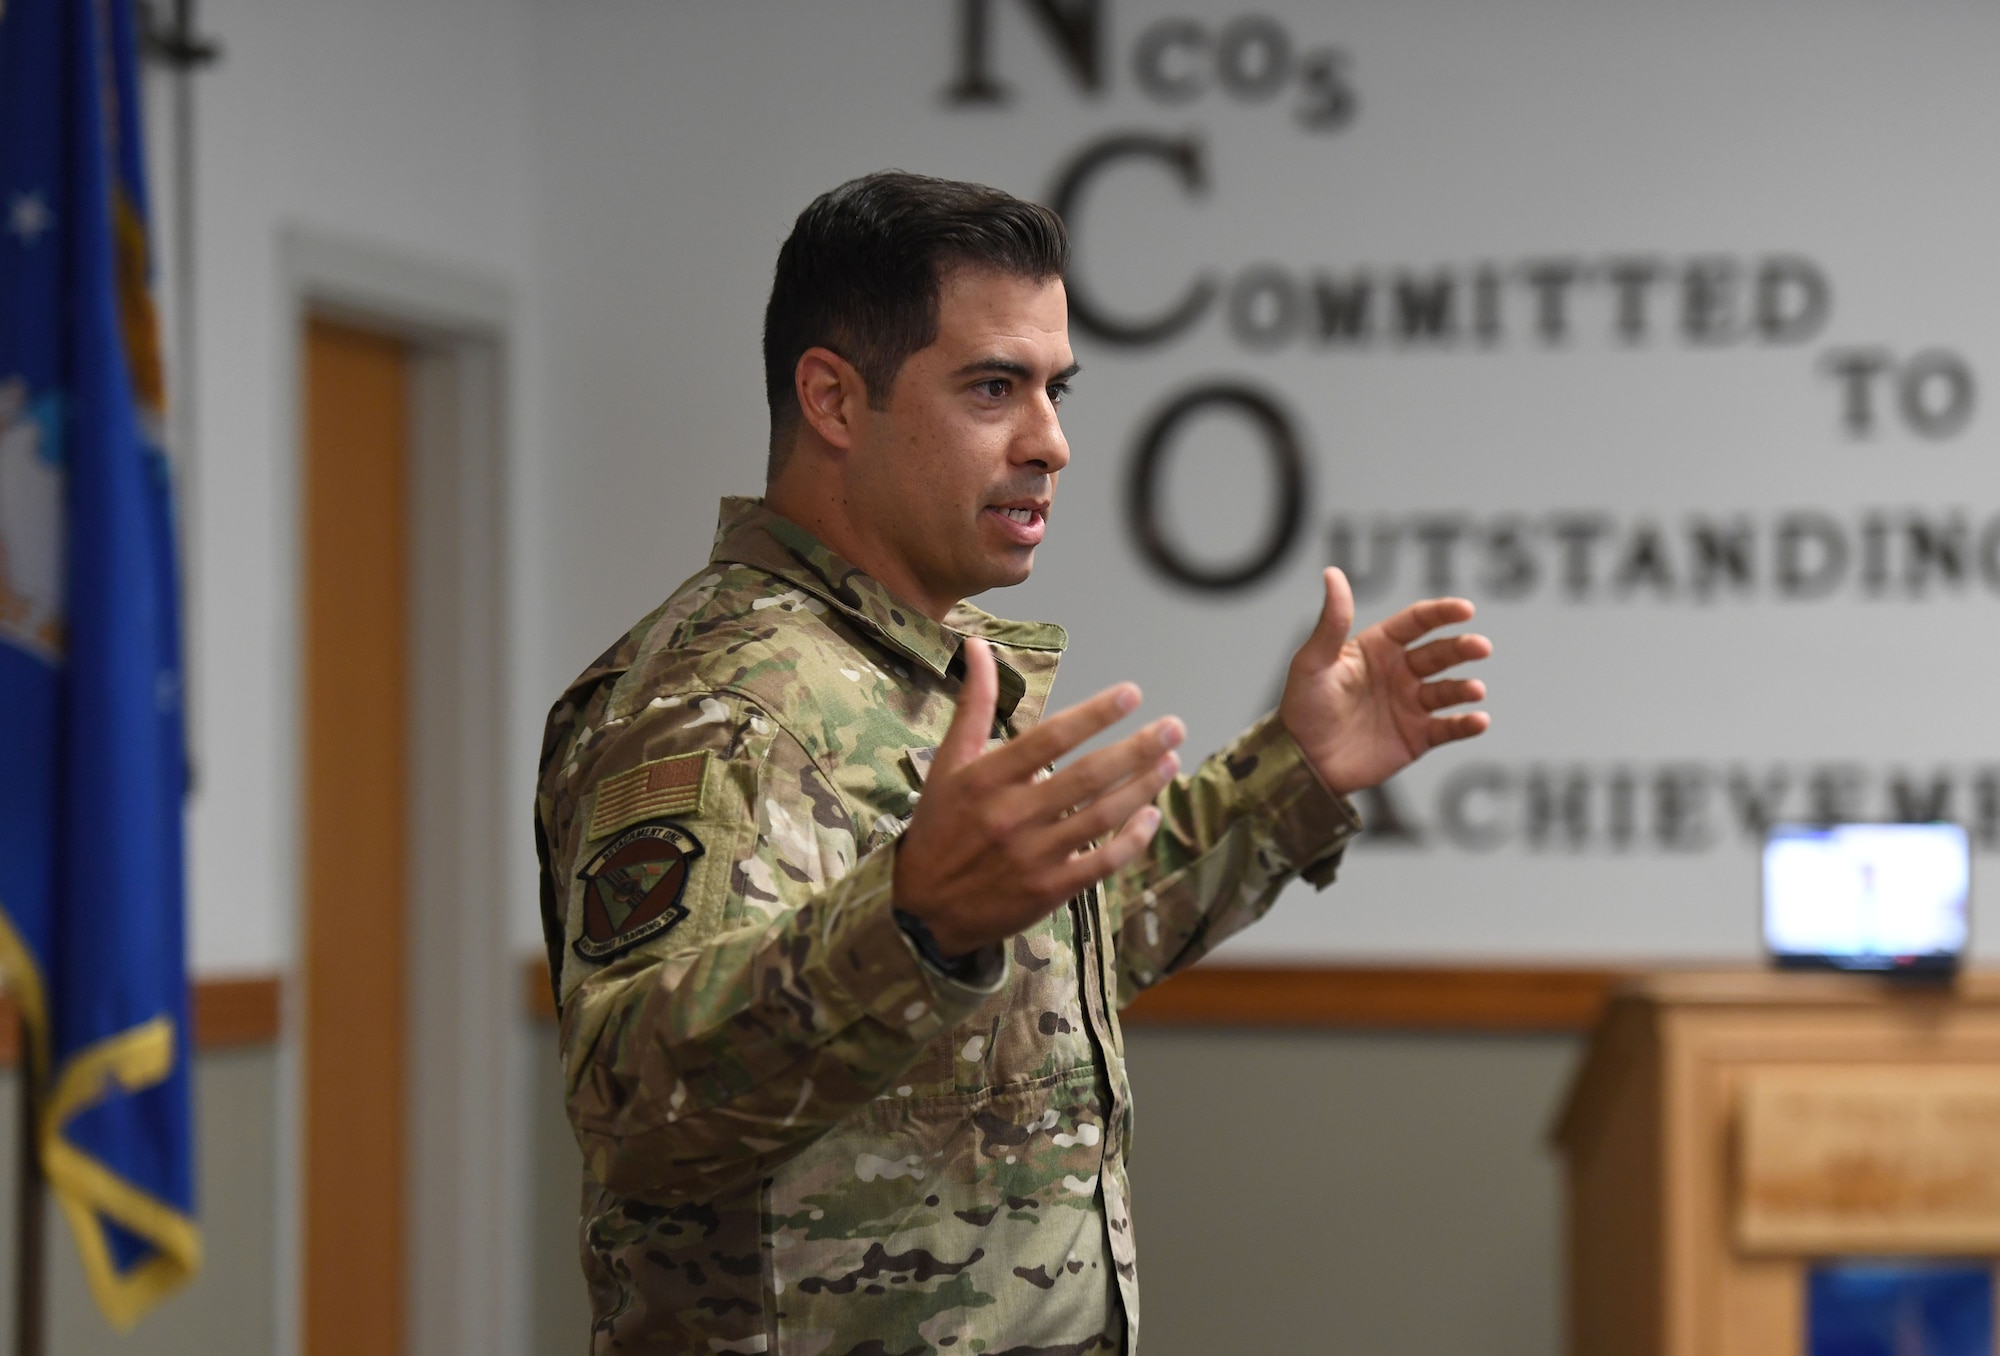 U.S. Air Force Tech. Sgt. August O'Niell, Air Force Wounded Warrior (AFW2) program ambassador, gives a brief to members of the NCO Academy inside Mathies Hall at Keesler Air Force Base, Mississippi, June 6, 2022. The AFW2 program provides concentrated non-medical care and support for combat wounded, ill and injured Airmen and their families as they recover and transition back to duty or into civilian life. (U.S. Air Force photo by Kemberly Groue)